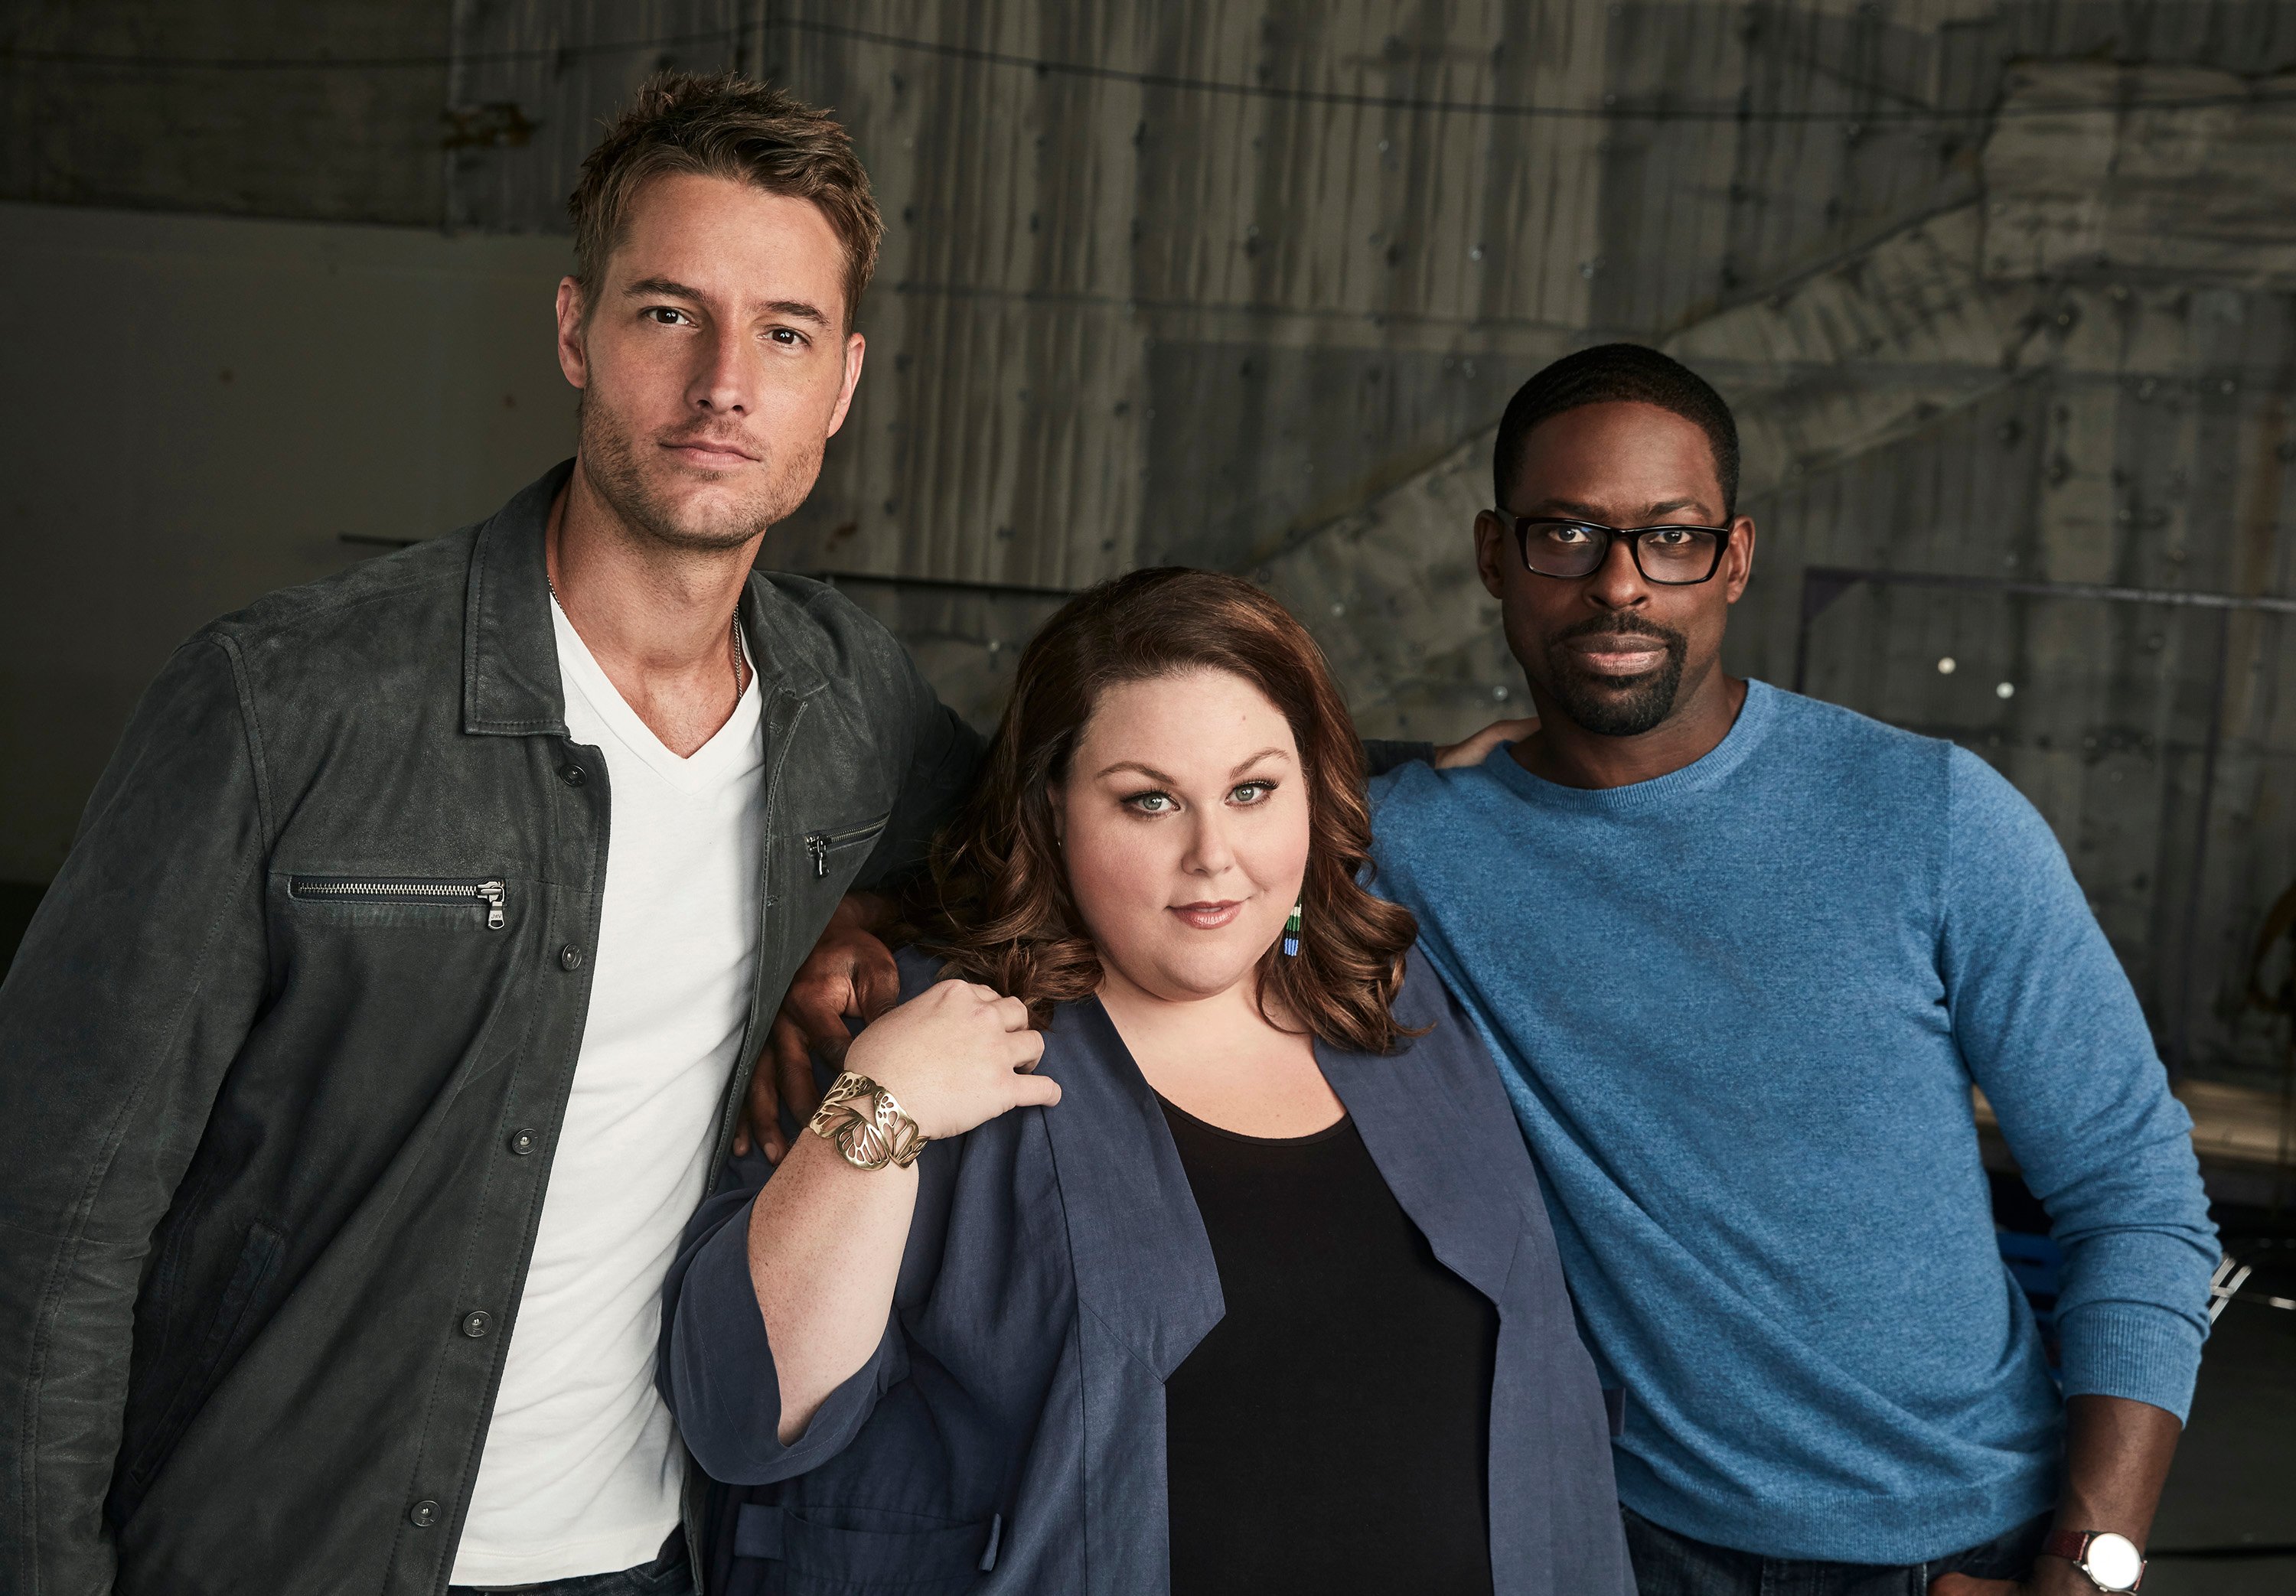 'This Is Us': The Big Three, Justin Hartley as Kevin Pearson, Chrissy Metz as Kate Pearson and Sterling K. Brown as Randall Pearson hugging each other while staring at the camera.